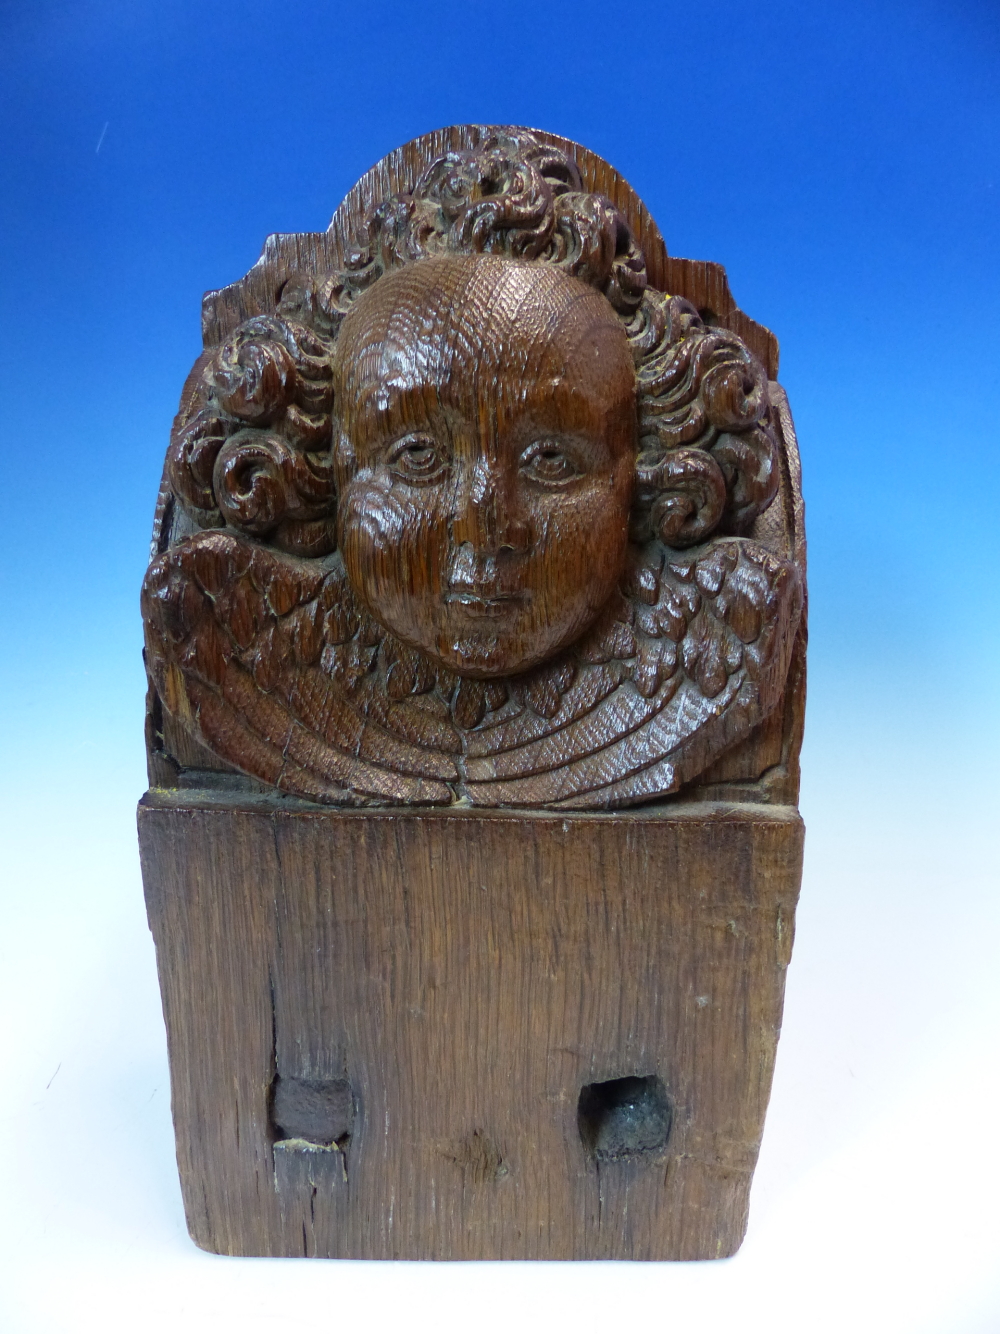 A 17th C. OAK BEAM END CARVED WITH THE HEAD OF A CURLY HAIRED ANGEL. W 15 x D 9 x H 28.5cms.